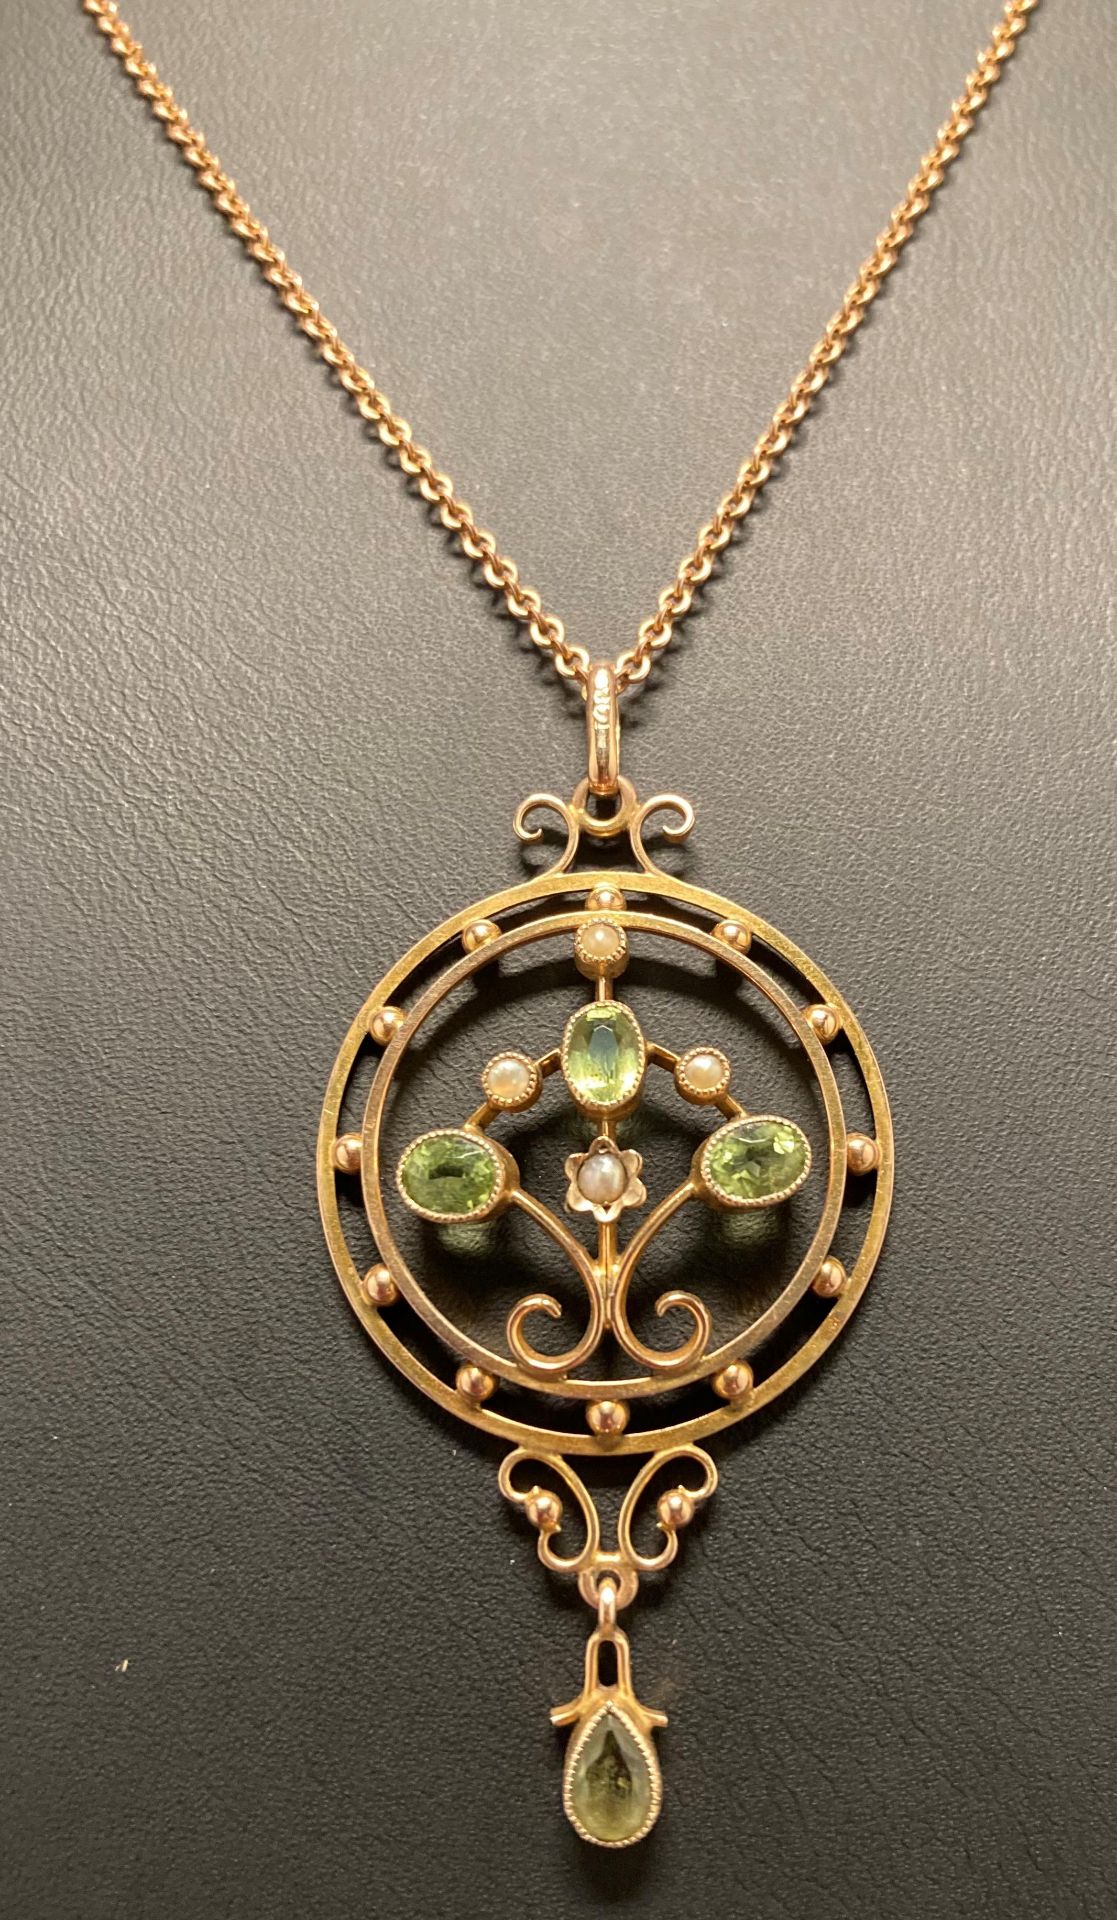 9ct gold necklace and pendant with light green stones and pearls (total weight 5. - Image 4 of 4